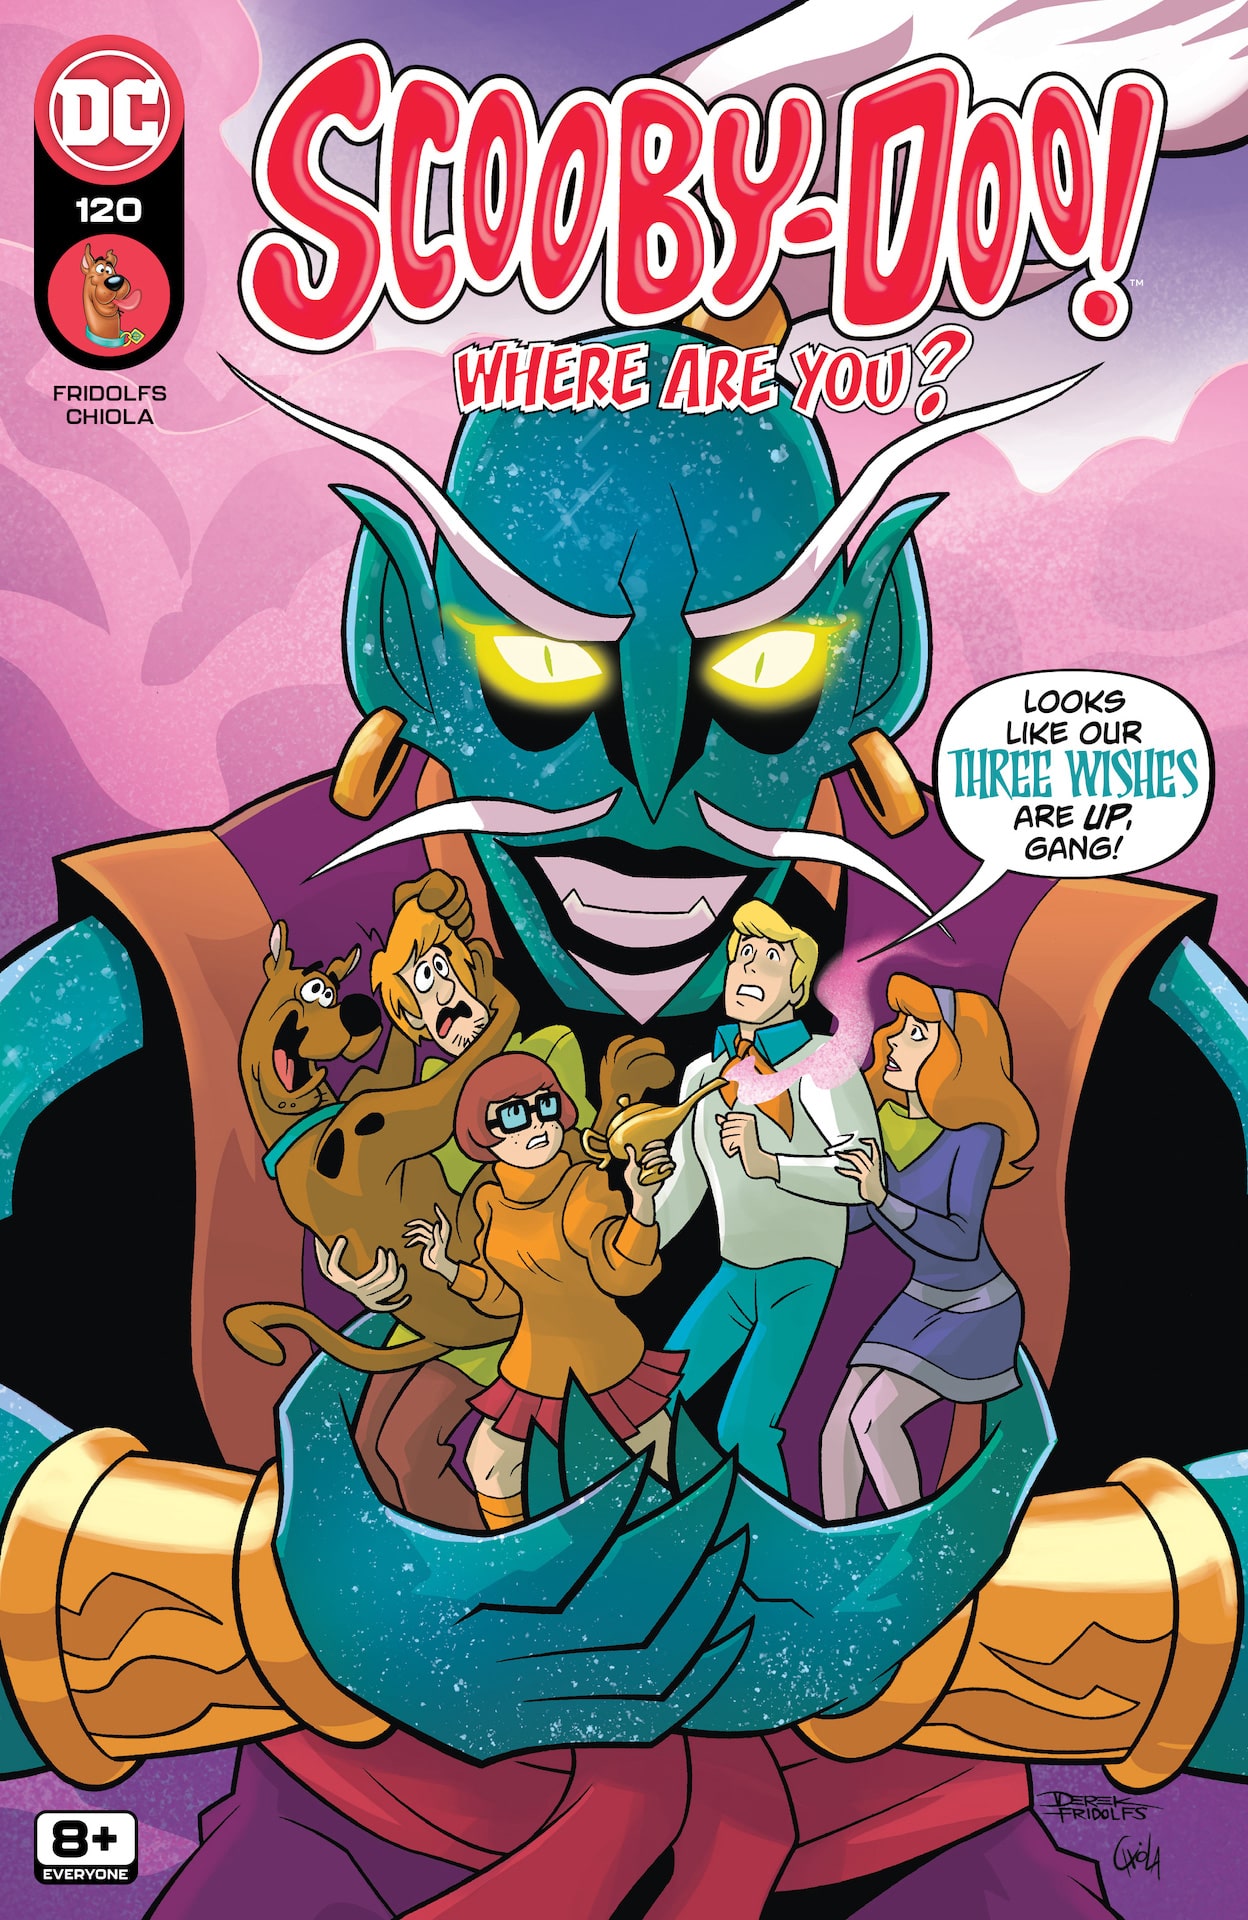 DC Preview: Scooby-Doo, Where Are You? #120